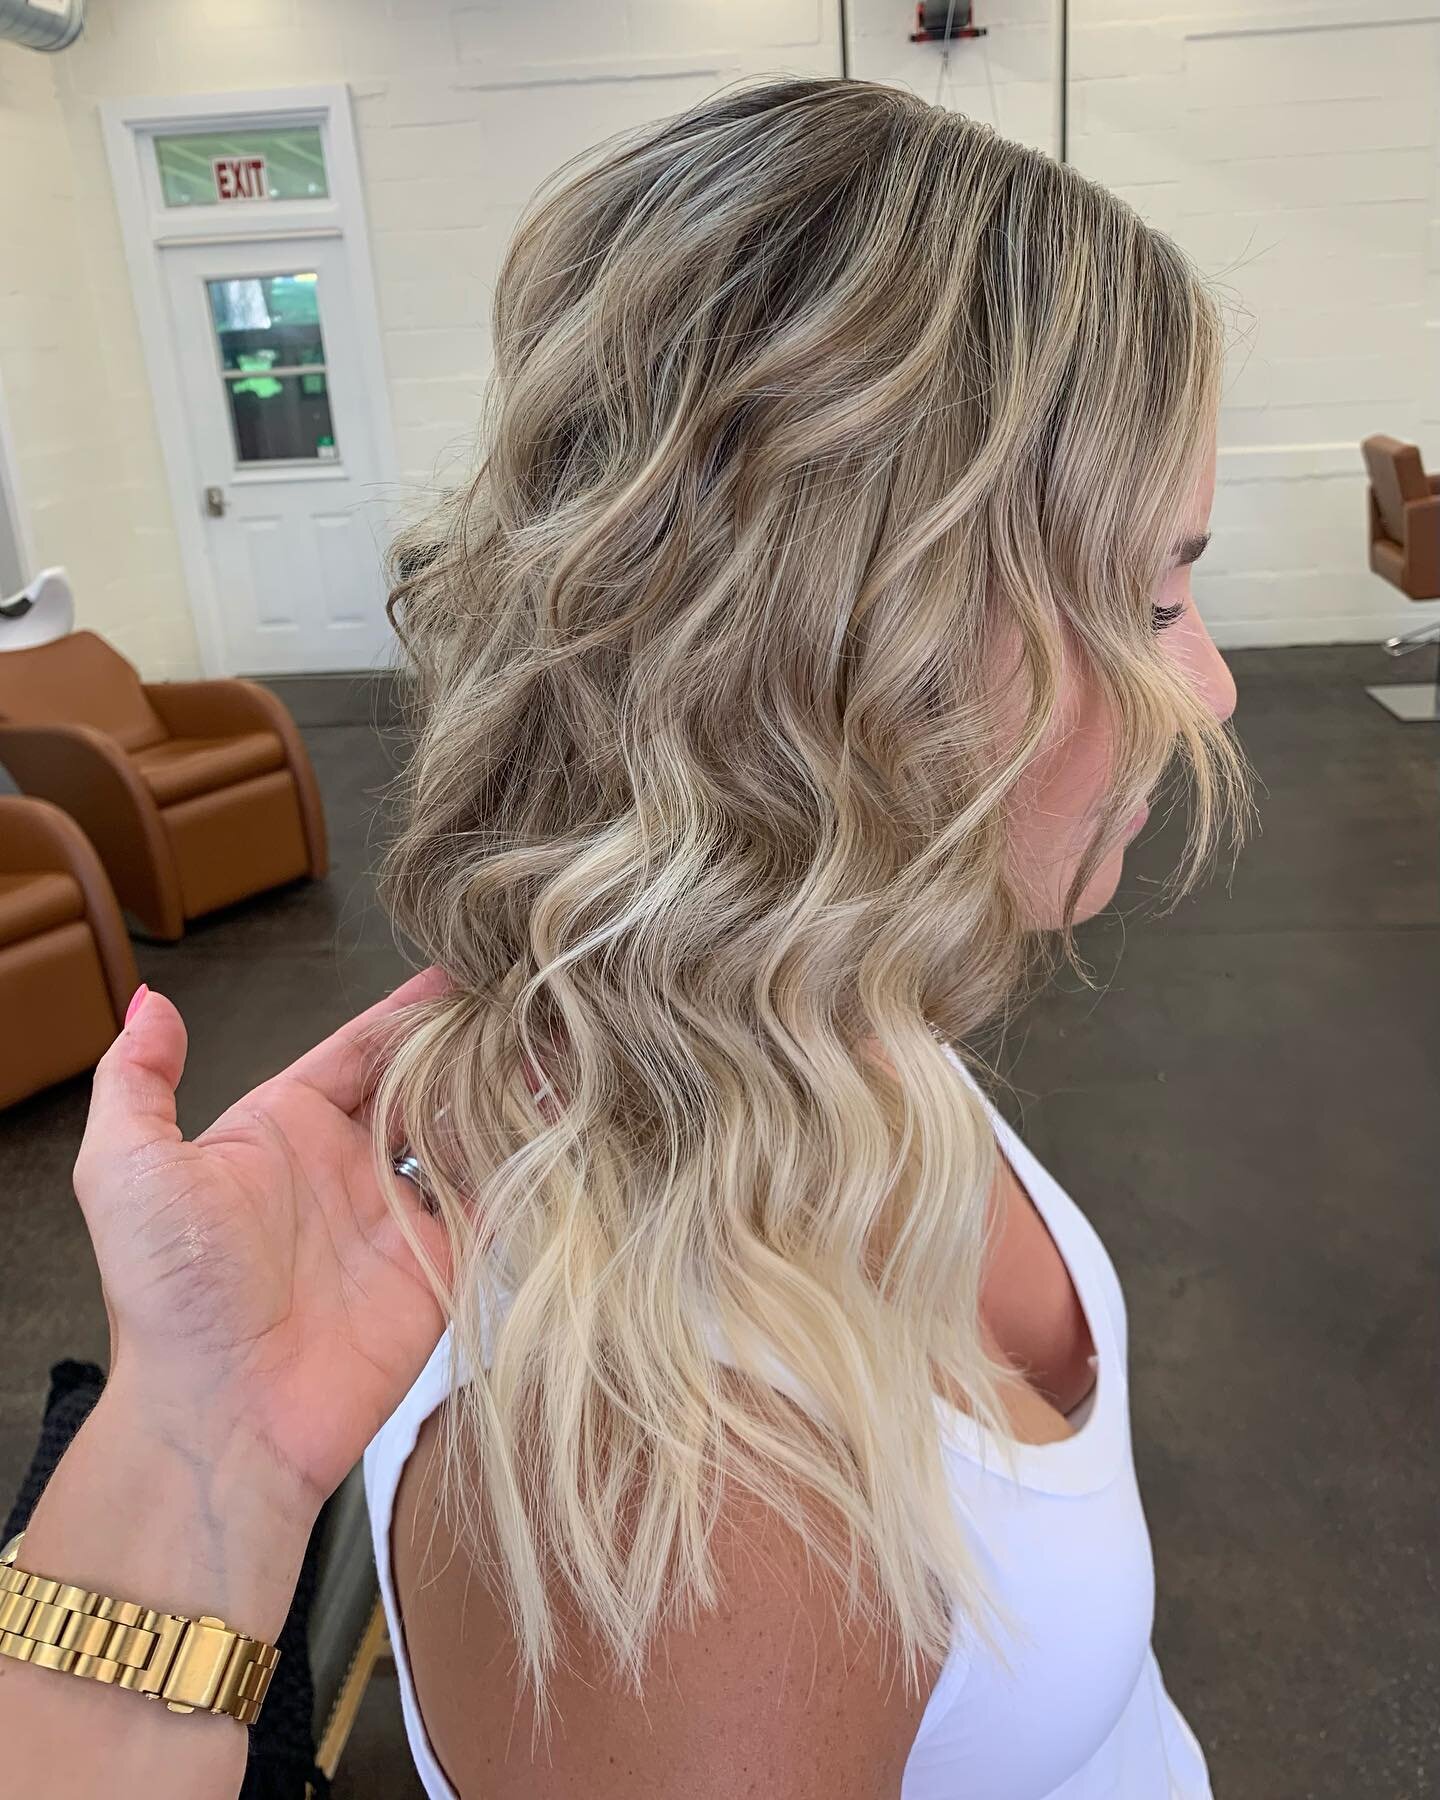 You&rsquo;re going to want to swipe to see this before 🤩⏩ 

GORGEOUS extension install by @hairbylaurendaubert with a little extra pop of blonde to brighten her up! 

#extensions #halocouture #tapeinextensions #balayage #colormatch #hhouseofhair #ce